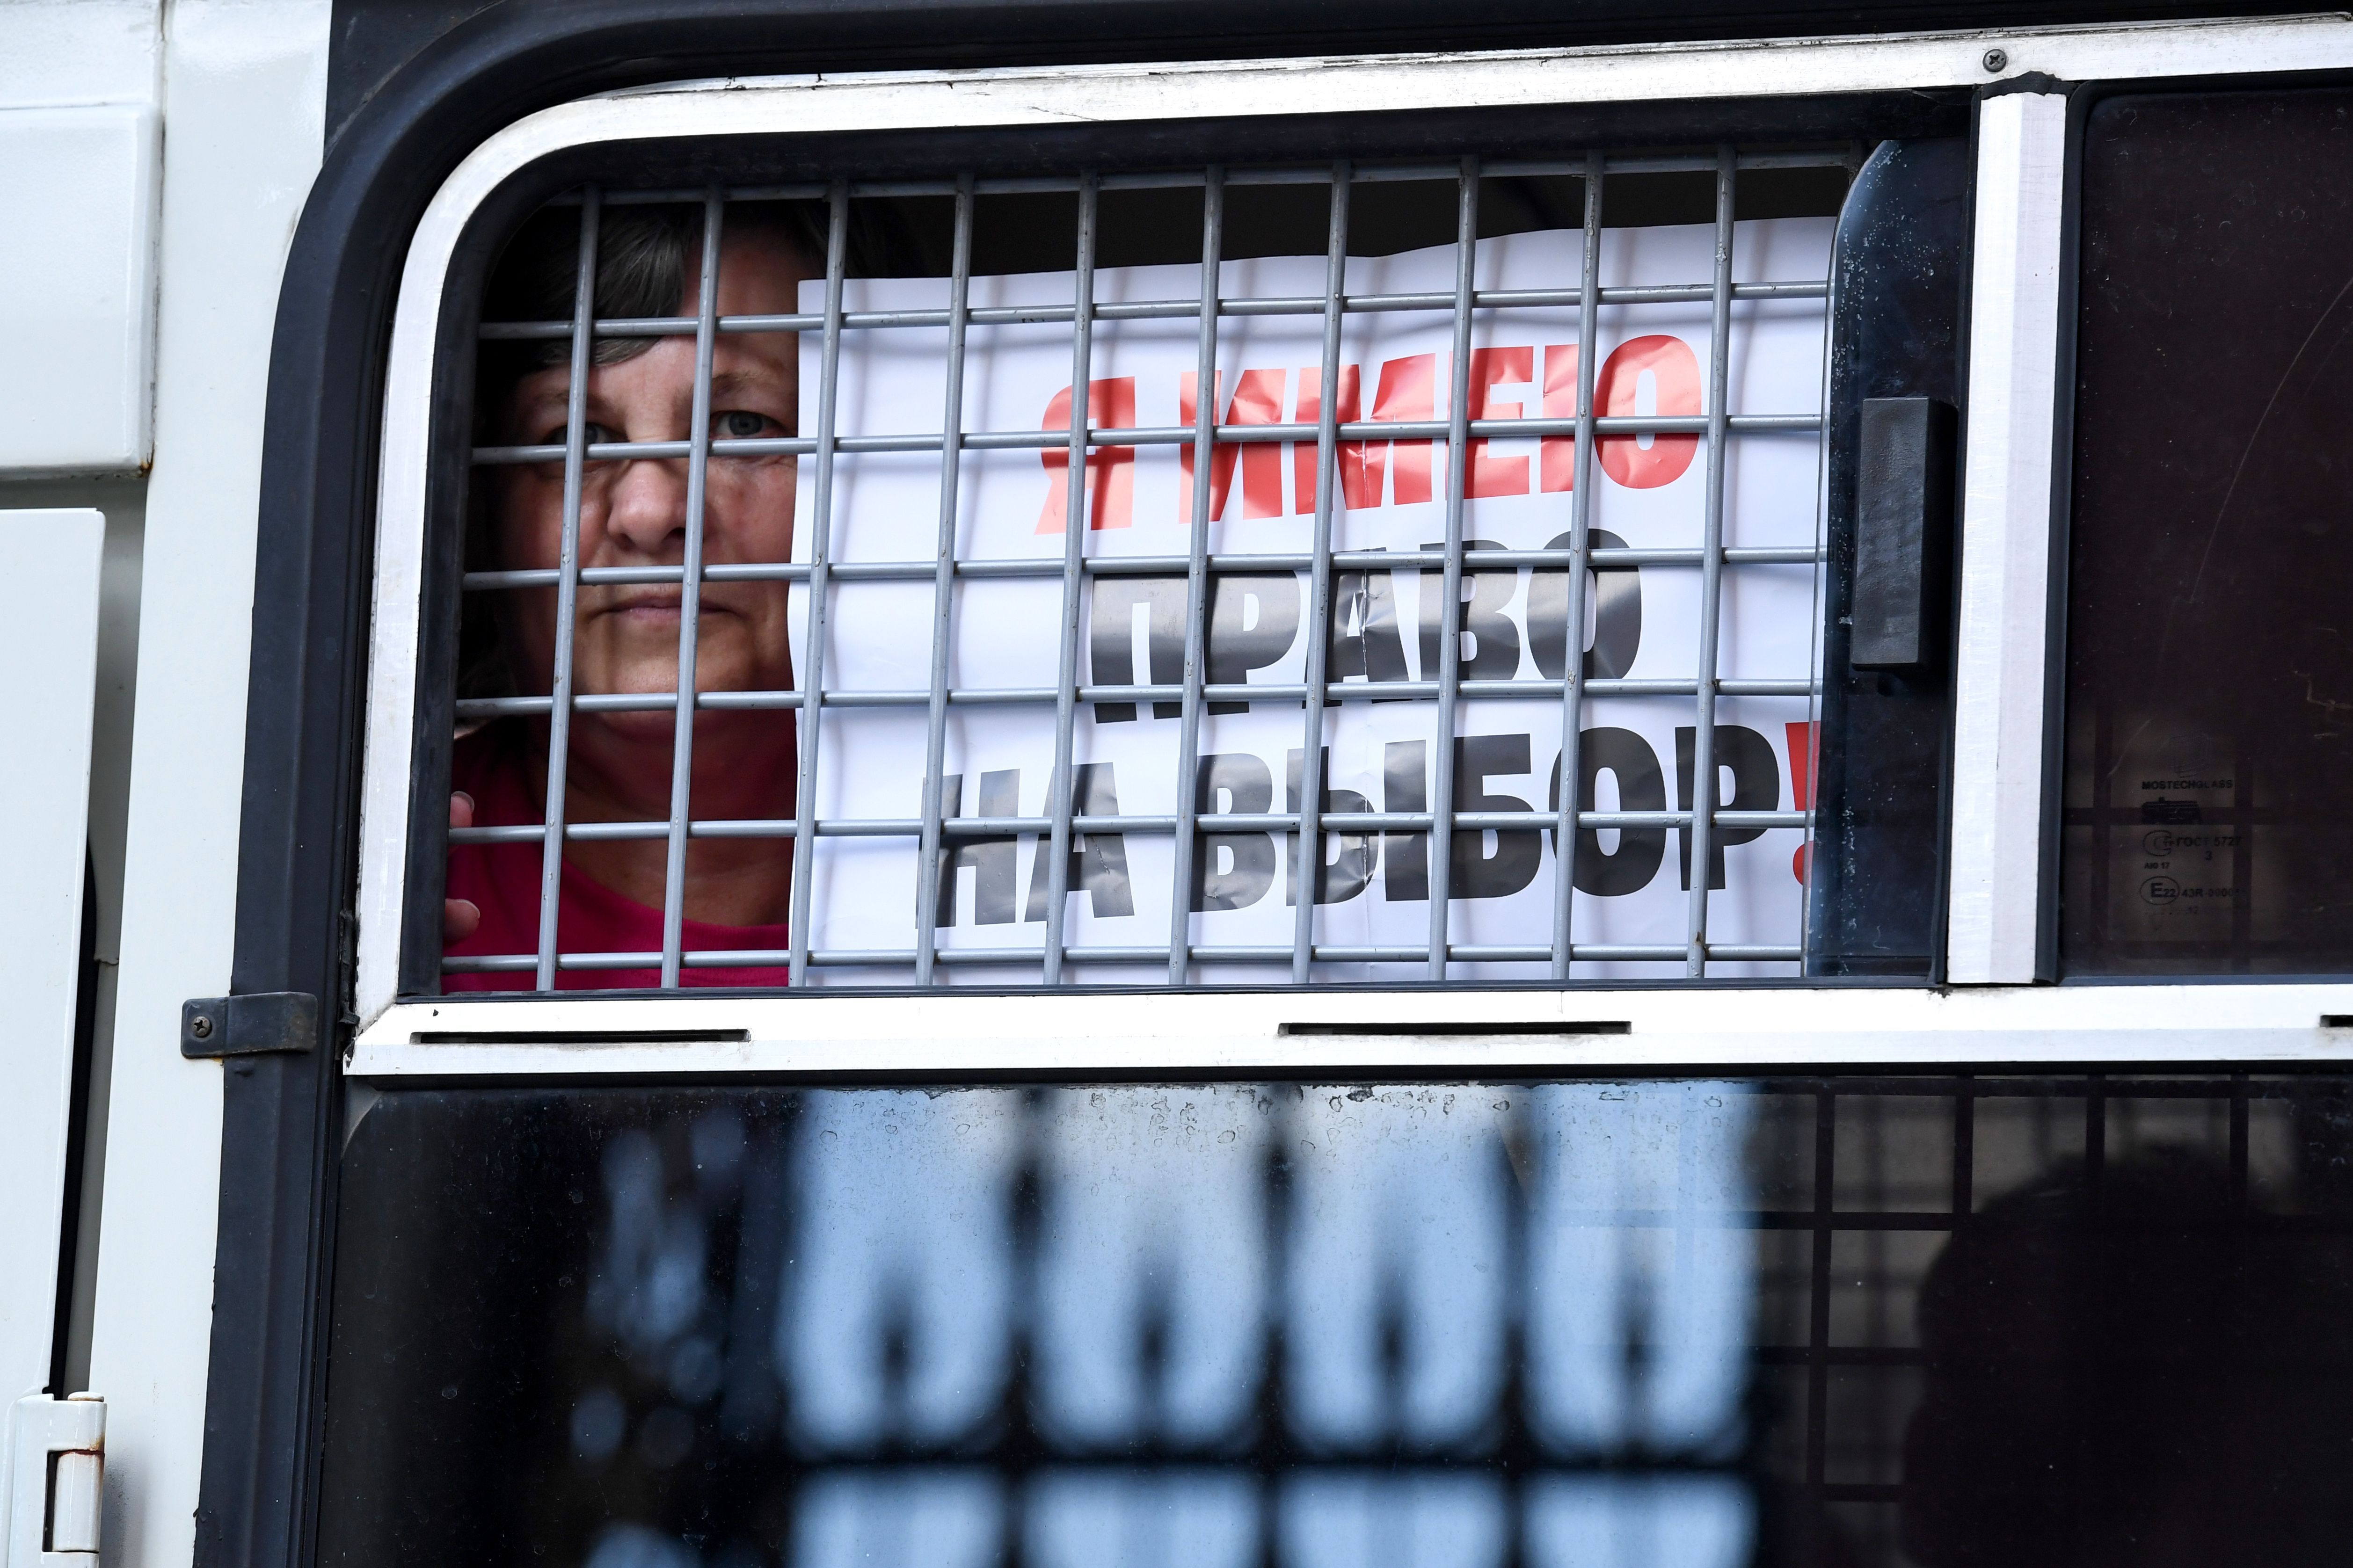 A detained protester shows the placard reading "I have the right to choose" from the window of a police bus.